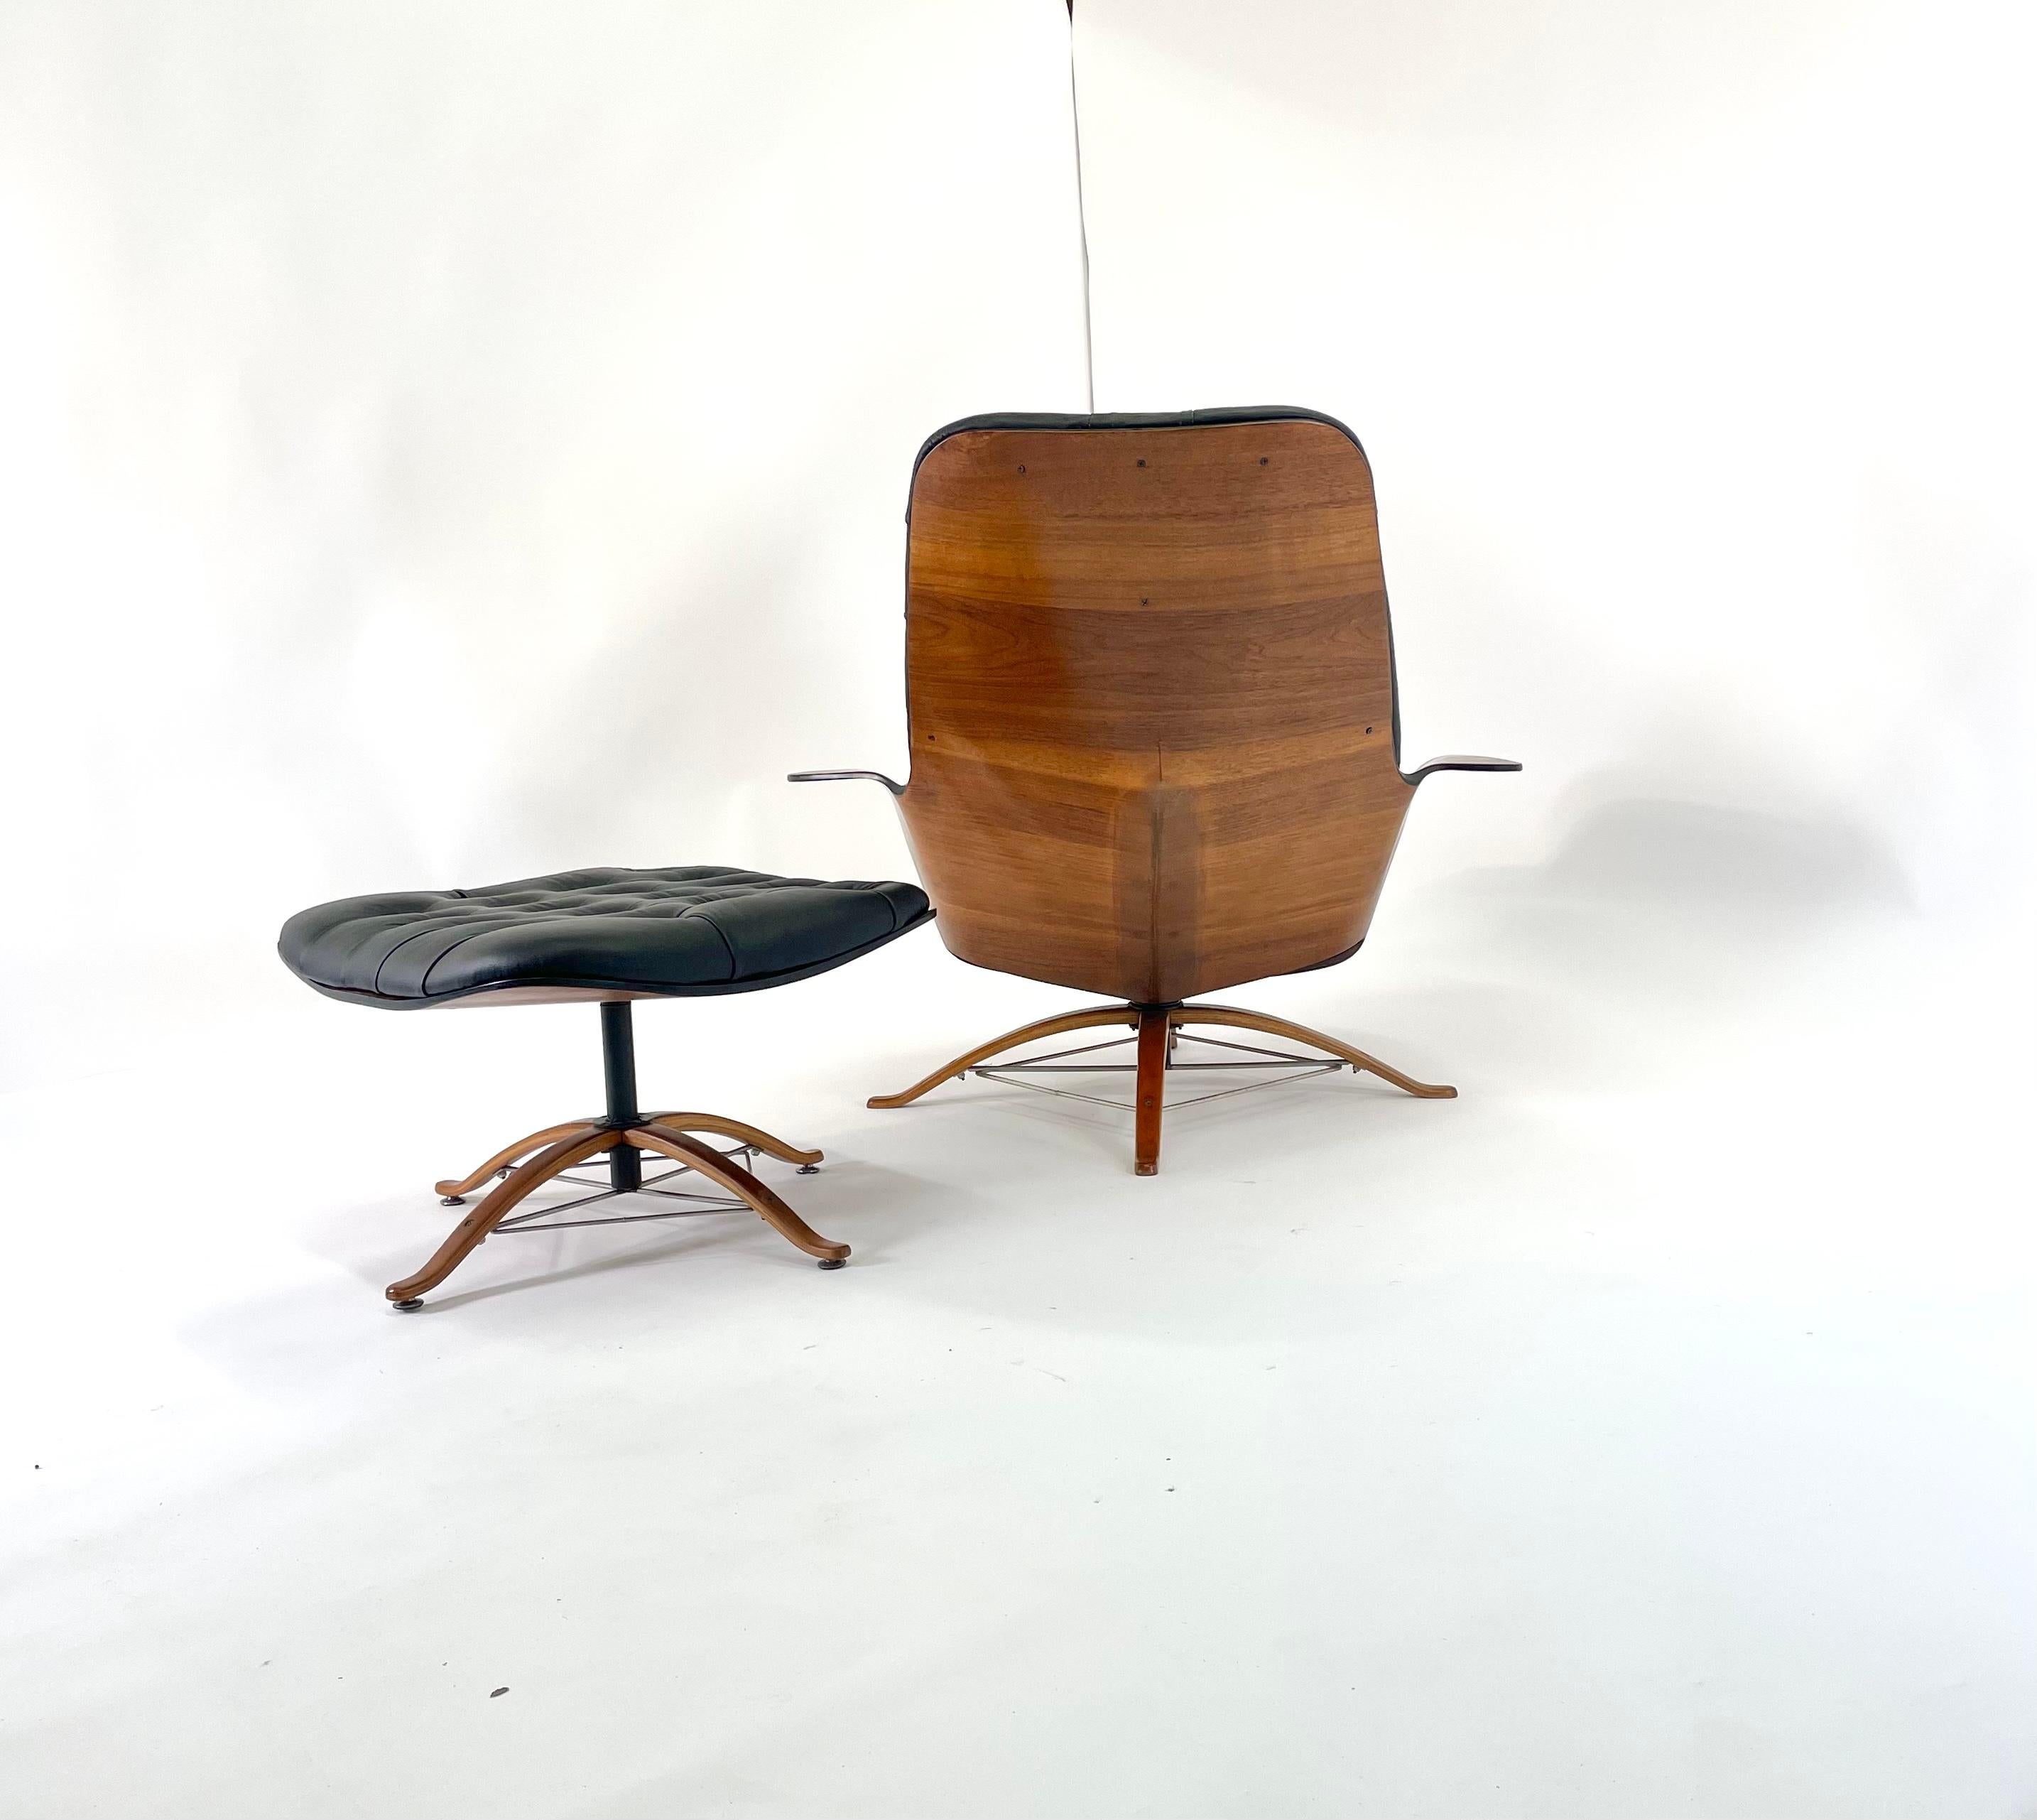 George Mulhauser designed this incredibly comfortable and attractive Mr Chair and ottoman in early 1960. We have restored the bentwood walnut shell and reupholstered in brand new black diamond tufted leather.  The Mr Chair first debuted at the